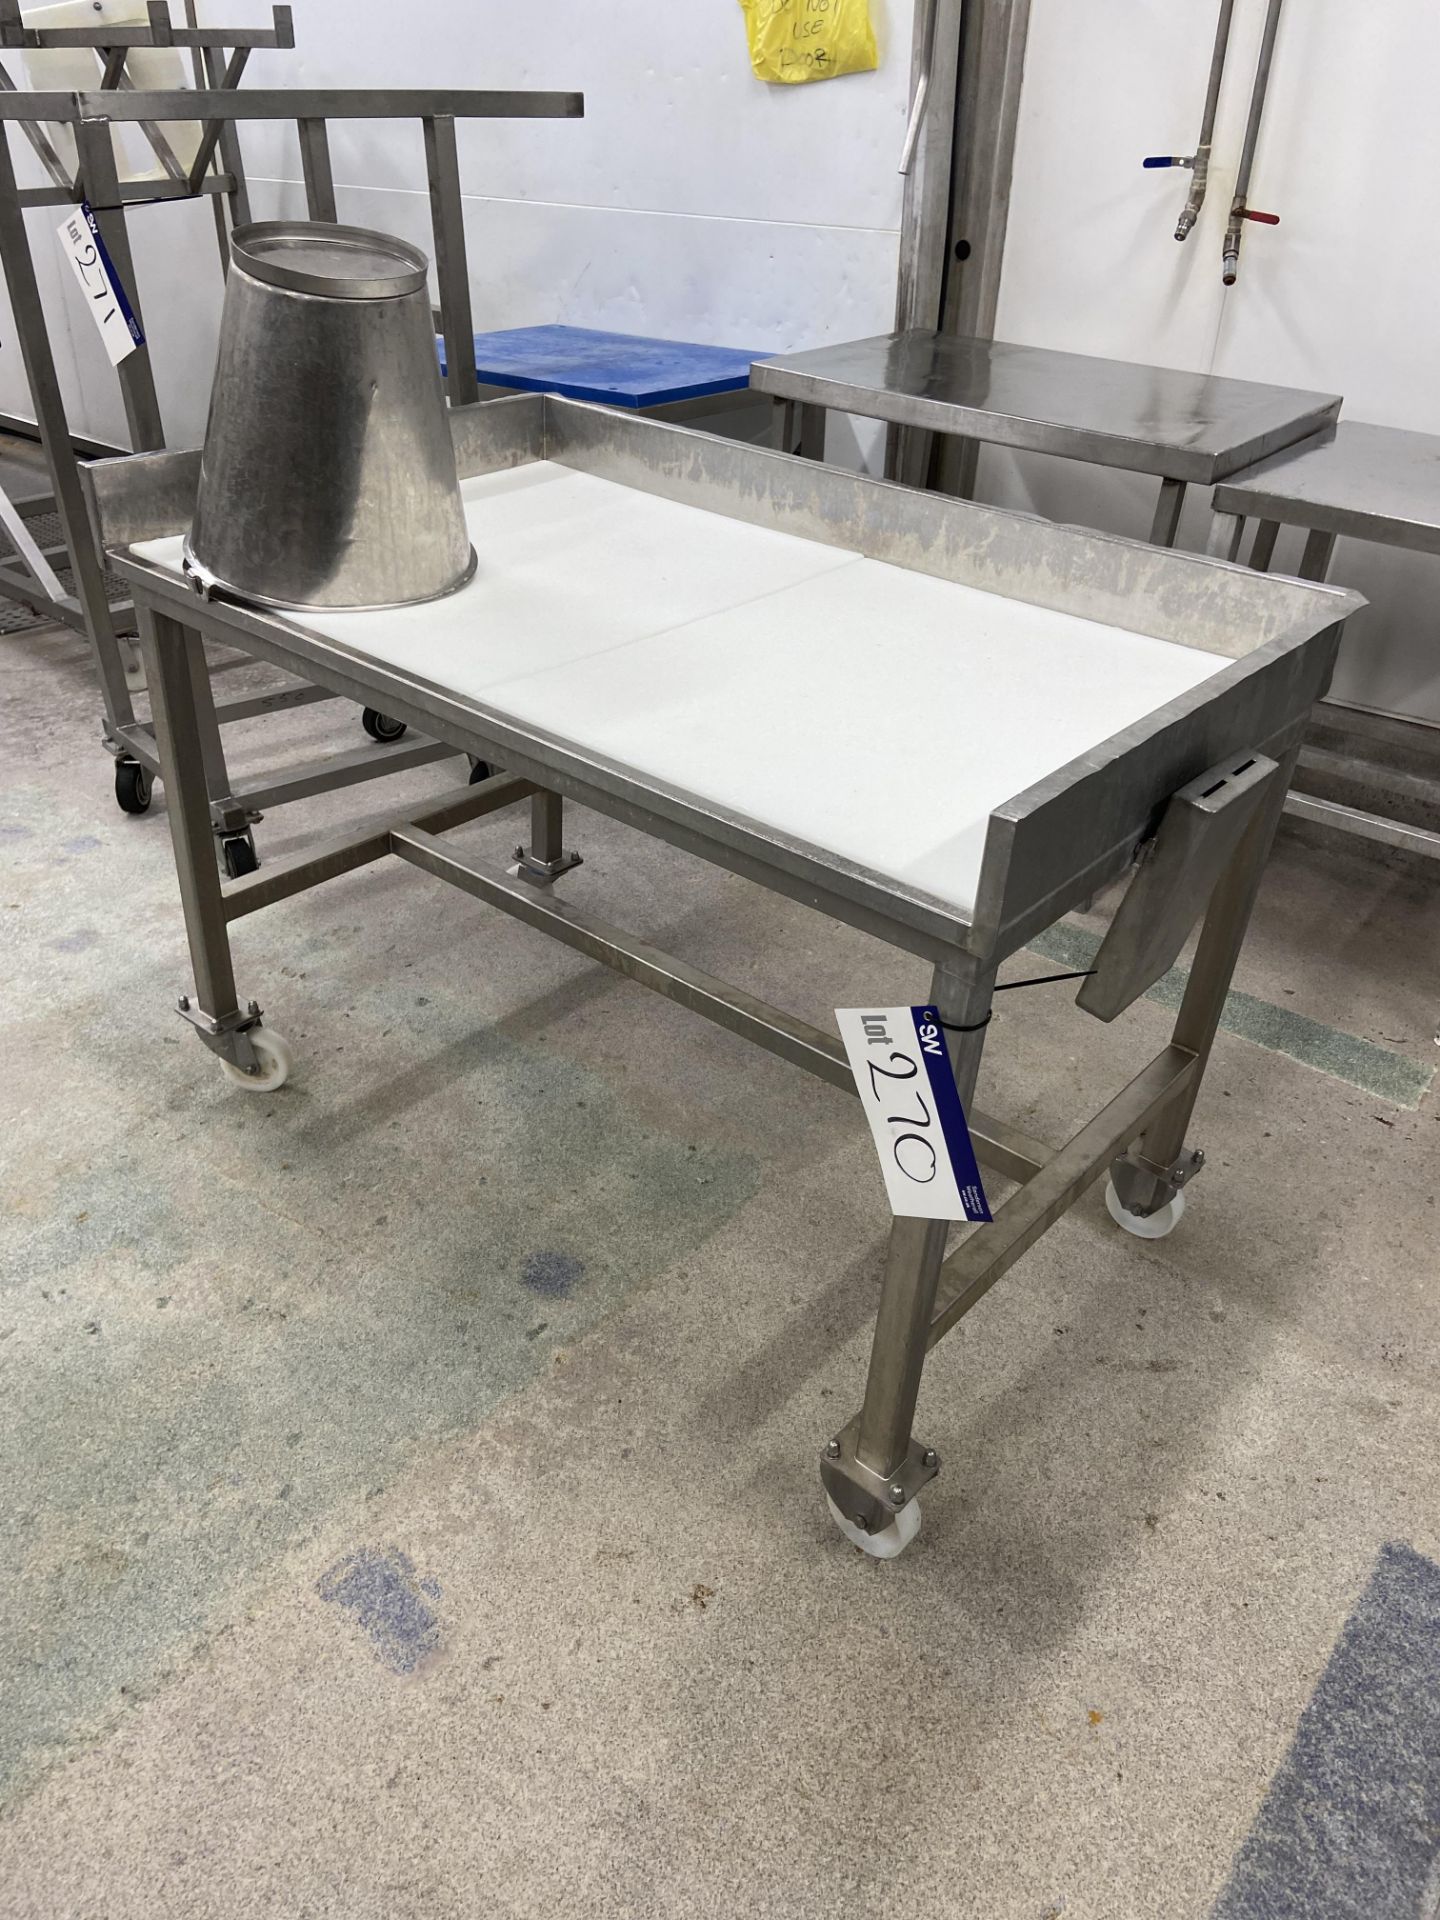 Mobile Stainless Steel Framed Bench, approx. 1.25m x 750mmPlease read the following important